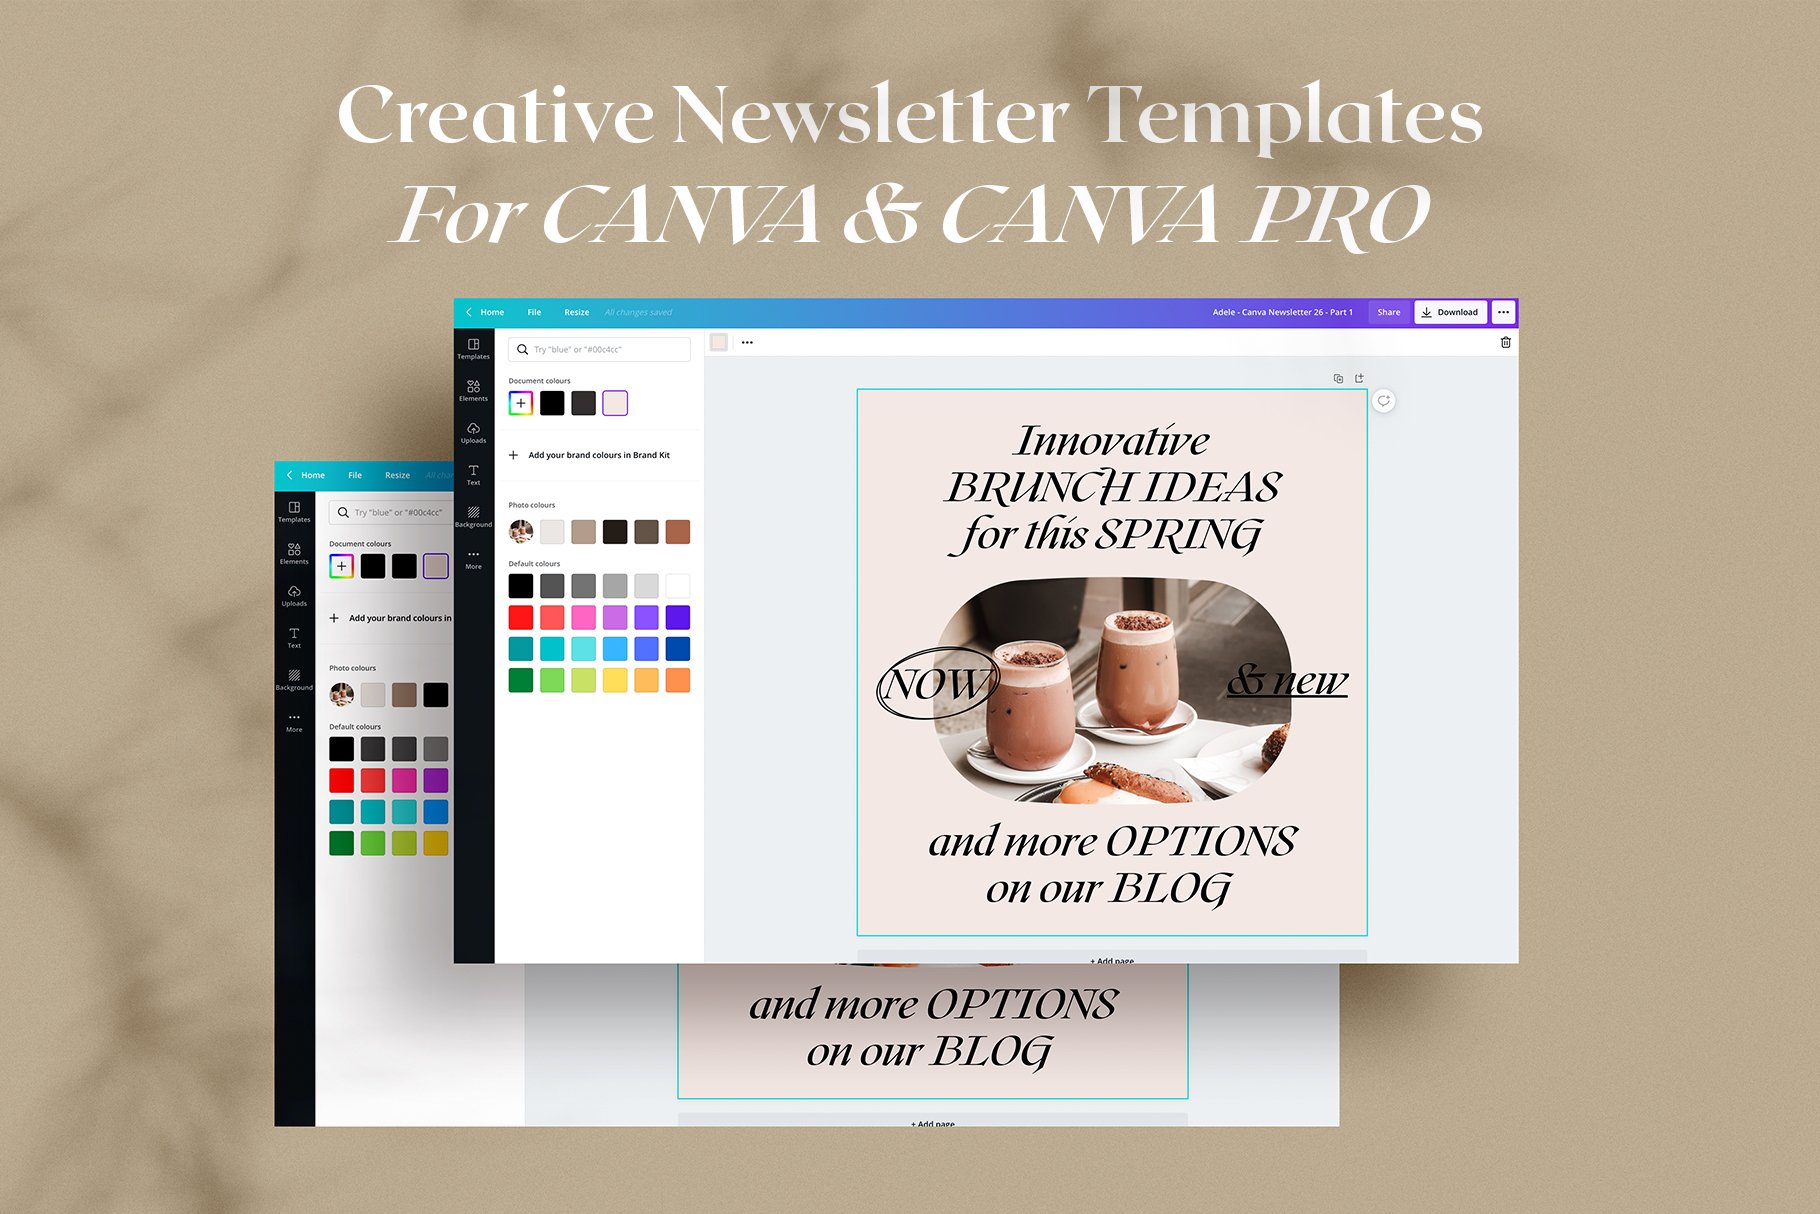 Creative newsletter template for canva.